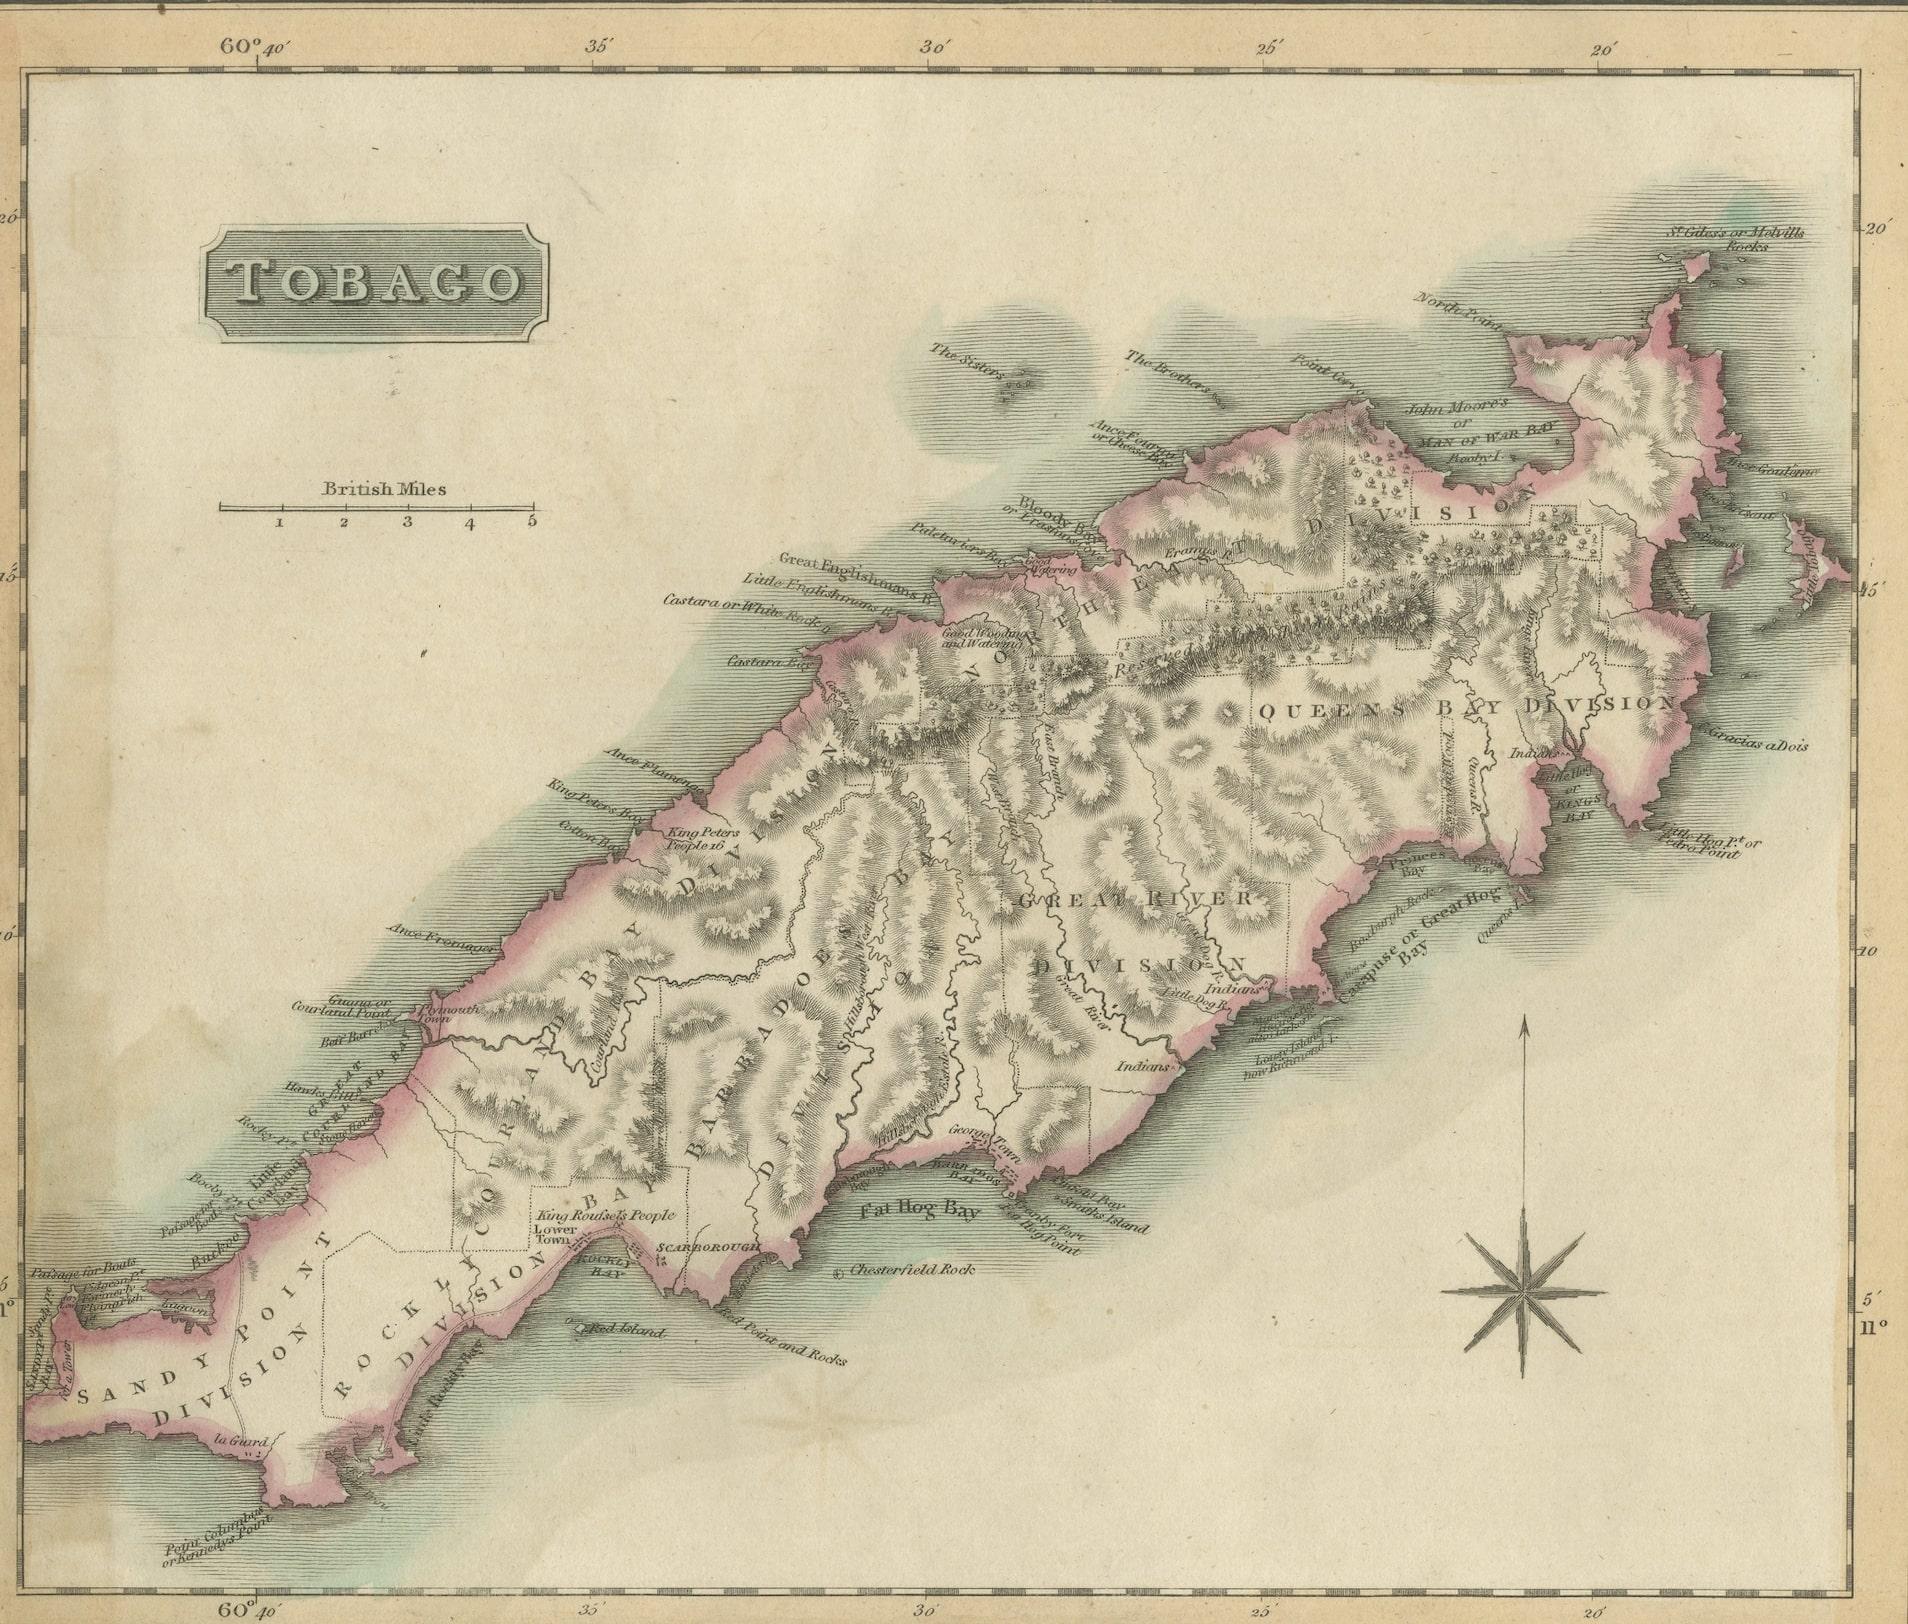 Discover Tobago in 1816: Original Engraving by John Thomson

This captivating original engraving, created by John Thomson in 1816, unveils a vivid portrayal of Tobago, an island nestled in the West Indies of the Caribbean. Offering a glimpse into